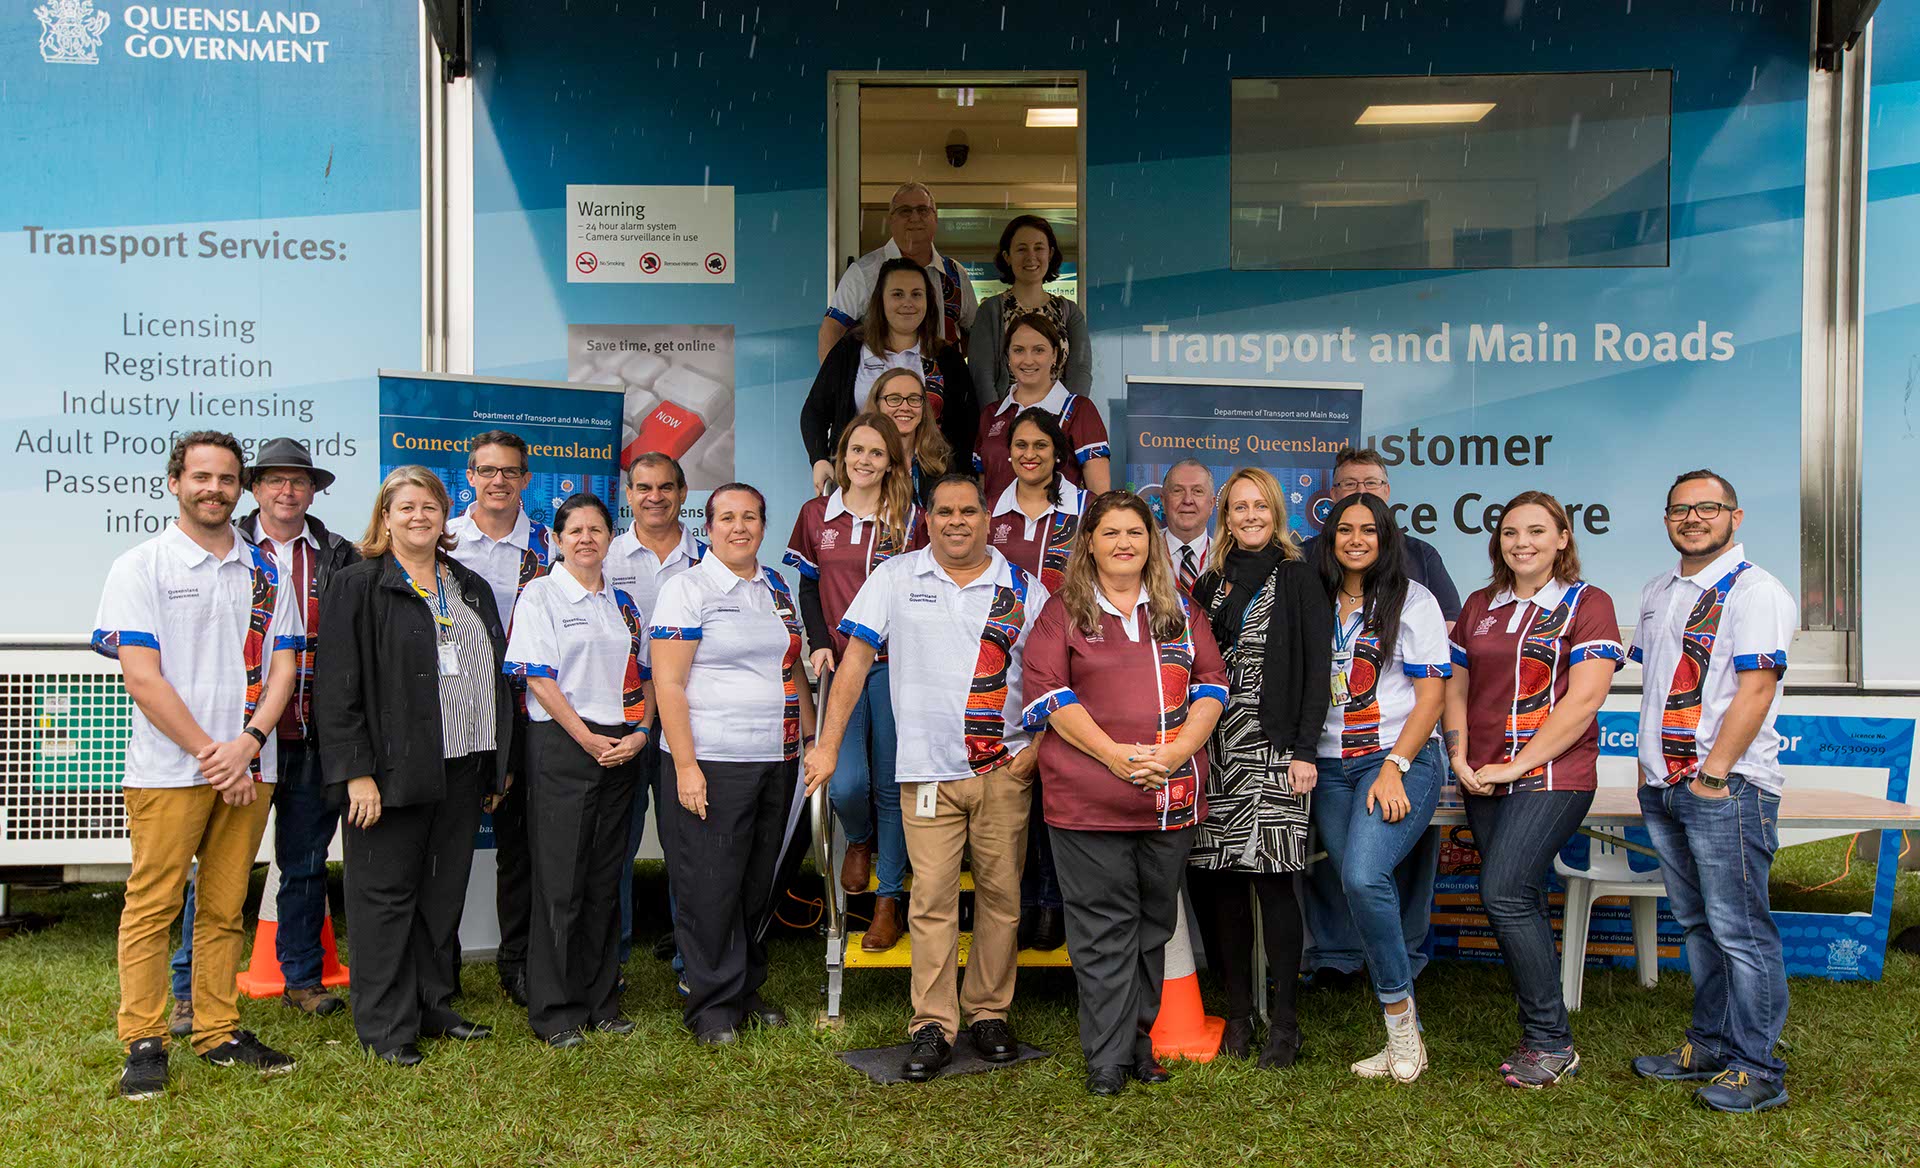 Employees with mobile Customer Service Centre (CSC) at NAIDOC Week 2017 event.